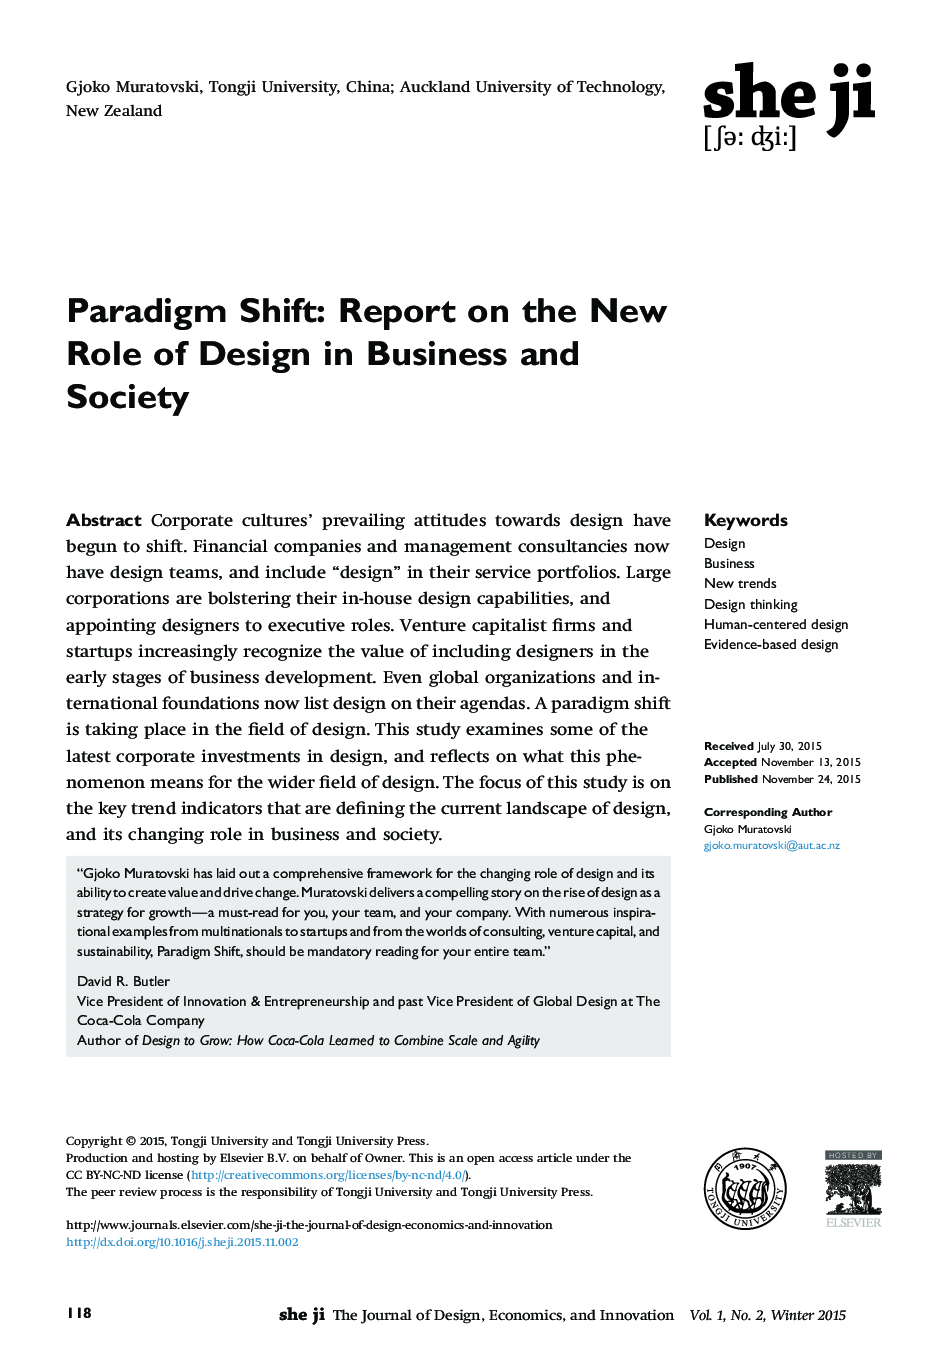 Paradigm Shift: Report on the New Role of Design in Business and Society 